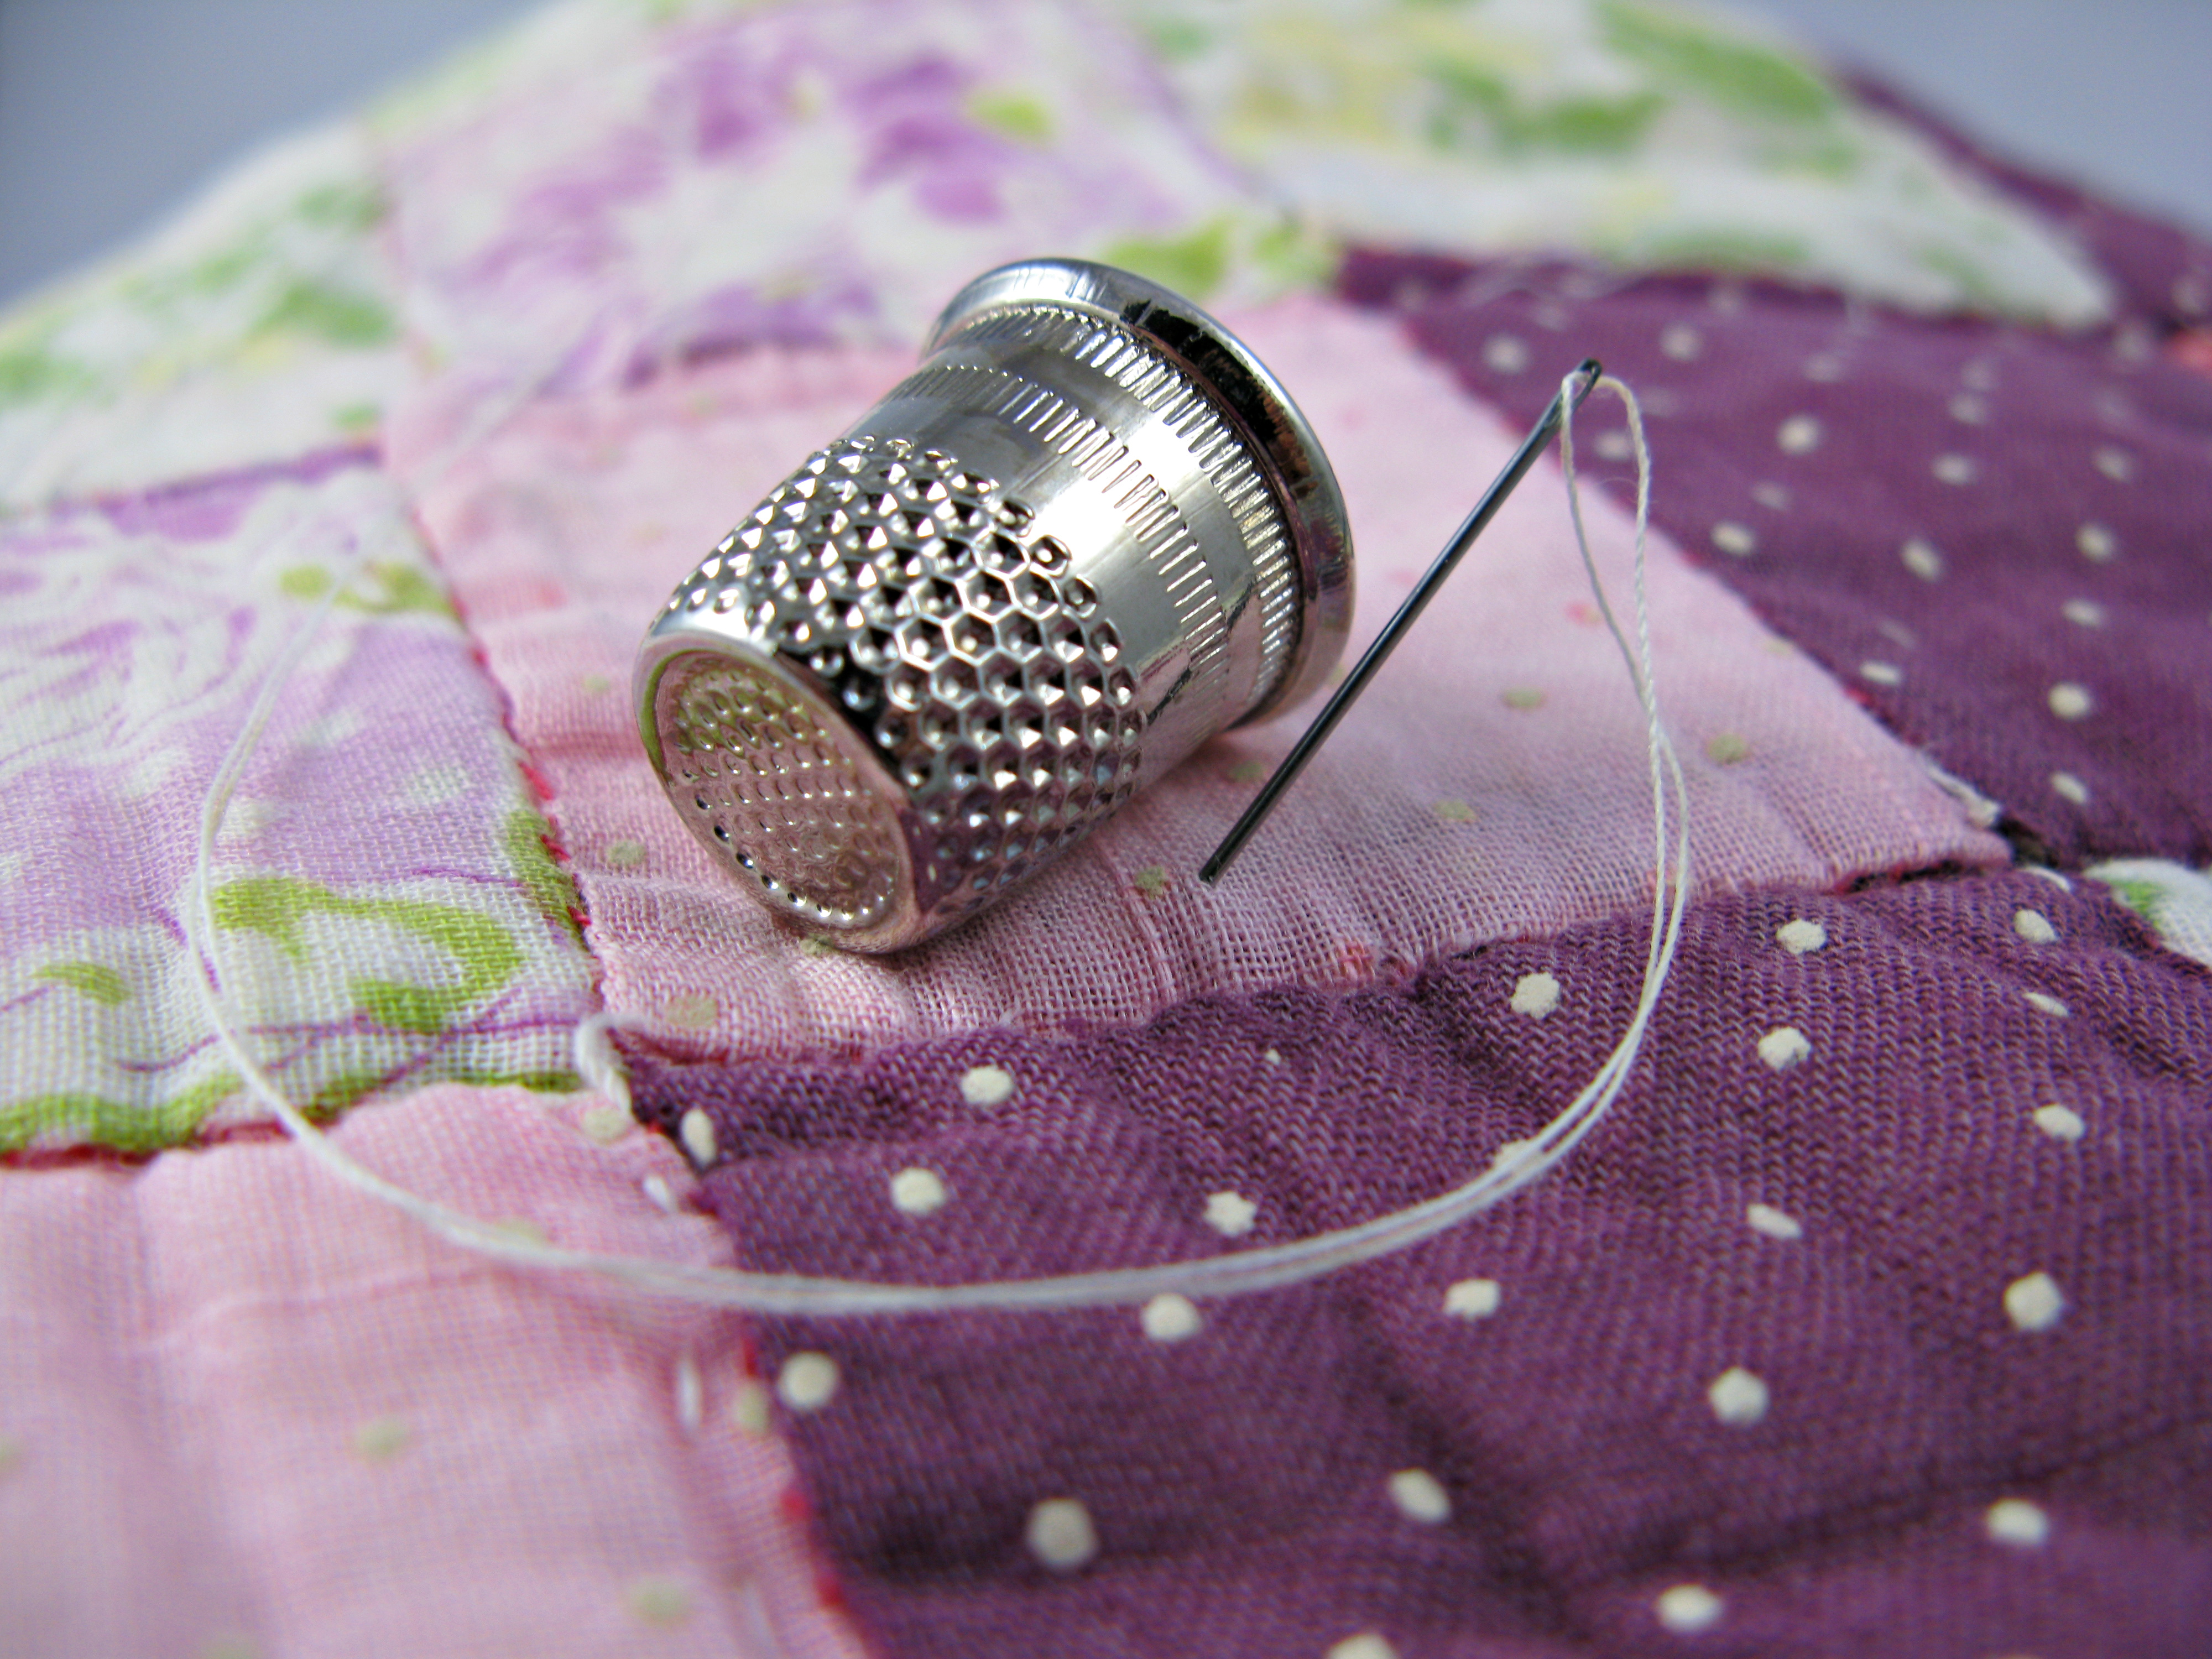 Quilt thimble sewing